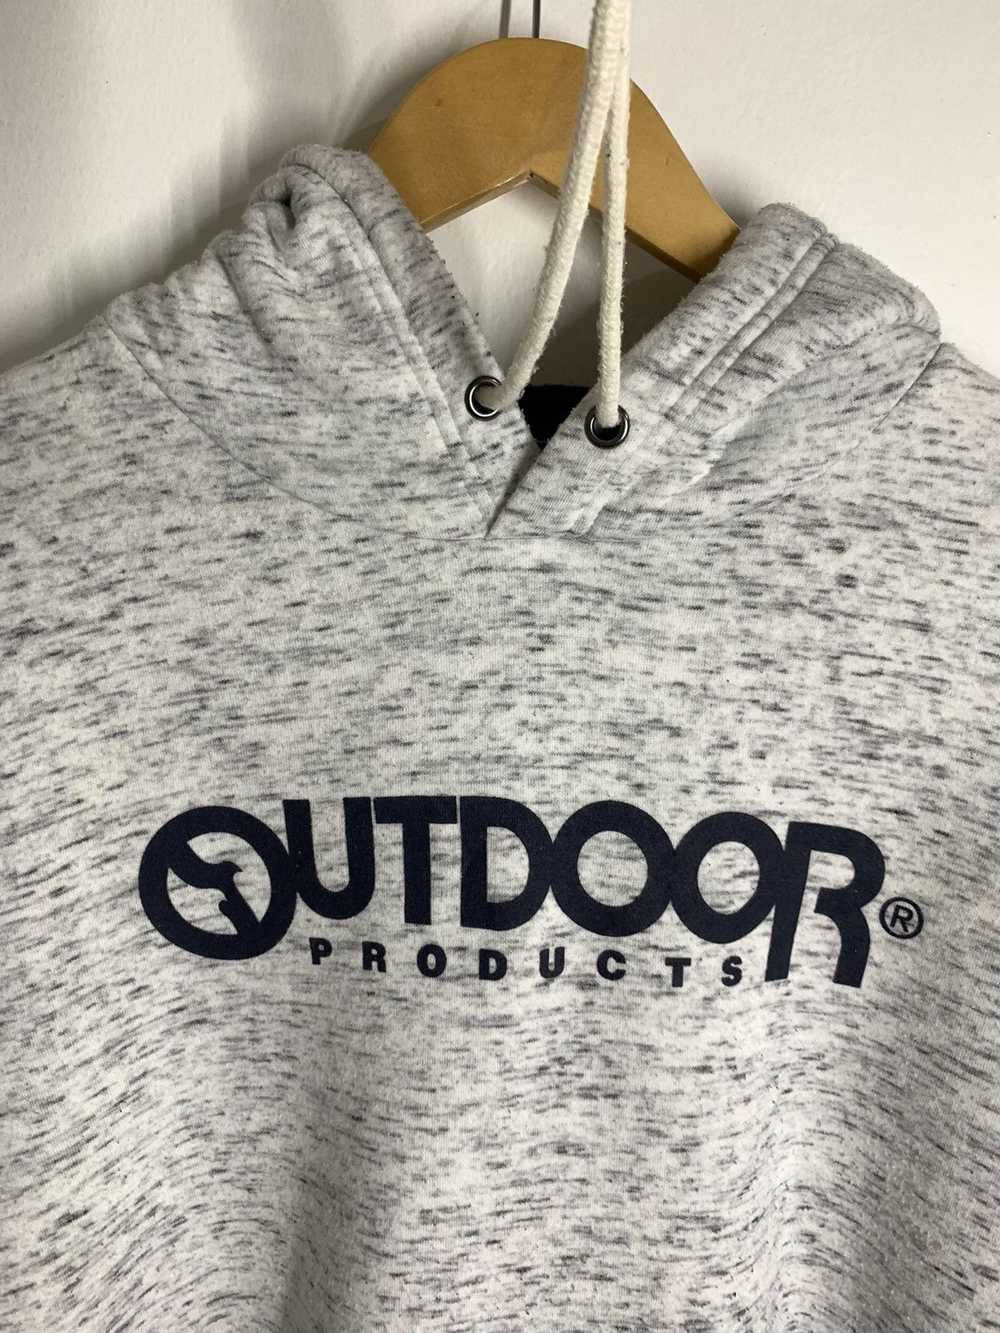 Outdoor Products × Streetwear × Vintage Outdoor P… - image 2